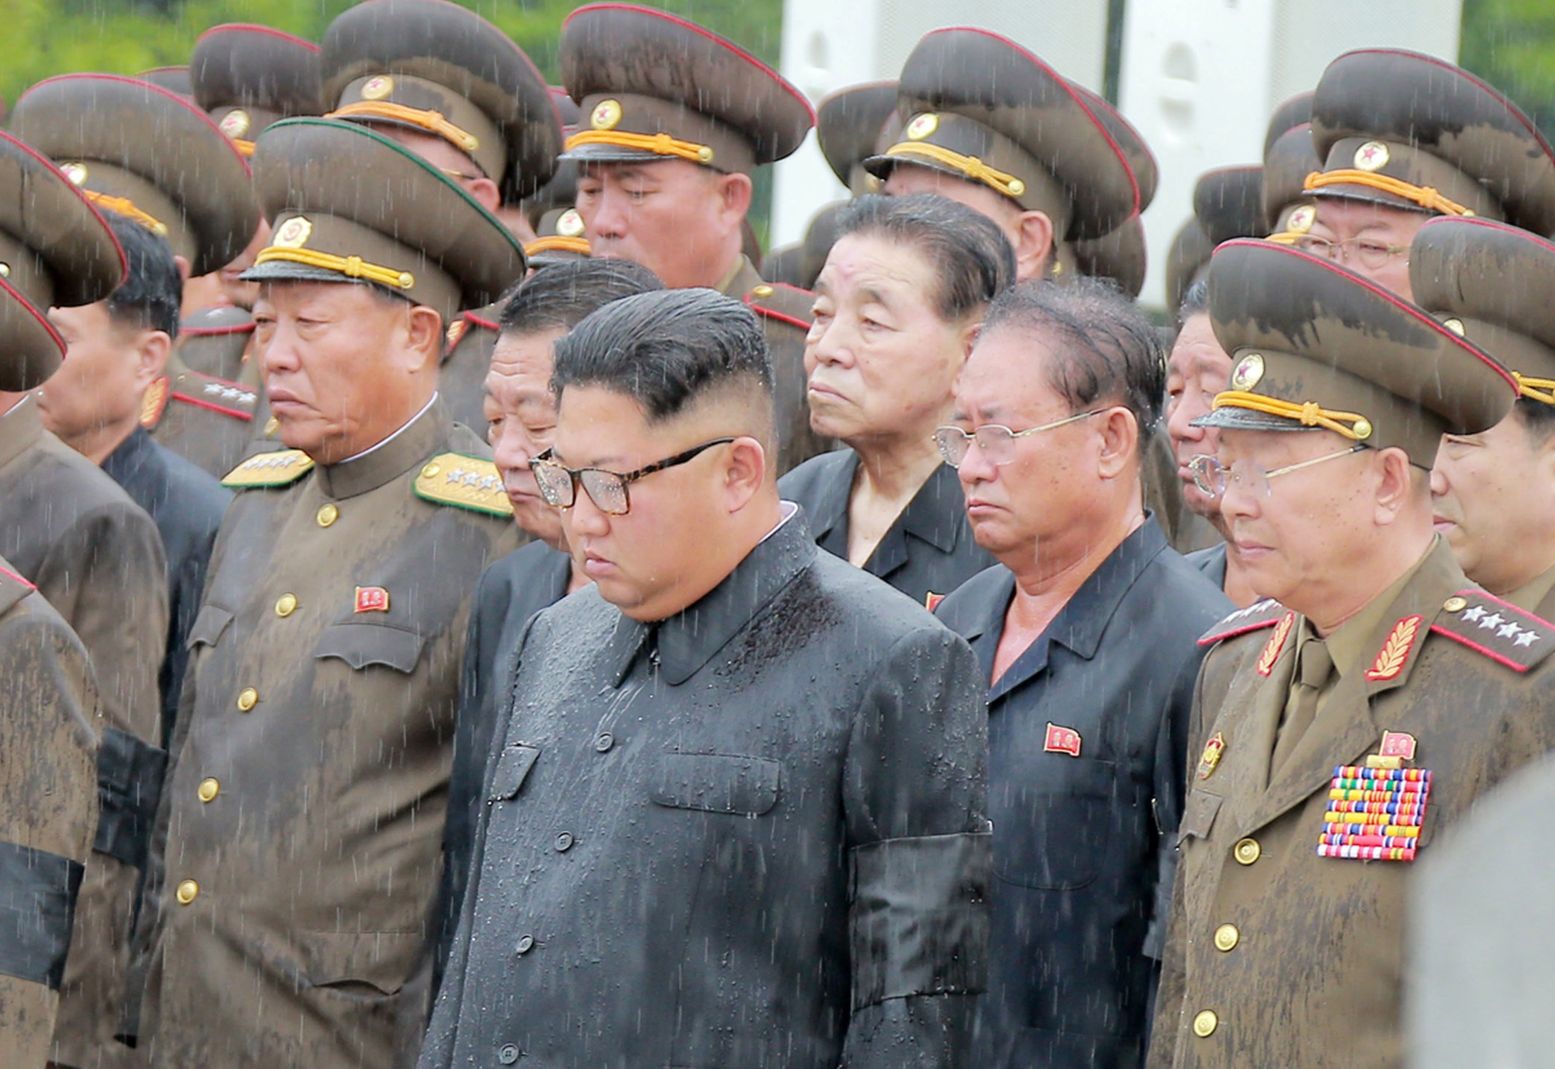  North  Korea  Faces an Under Population Bomb The 